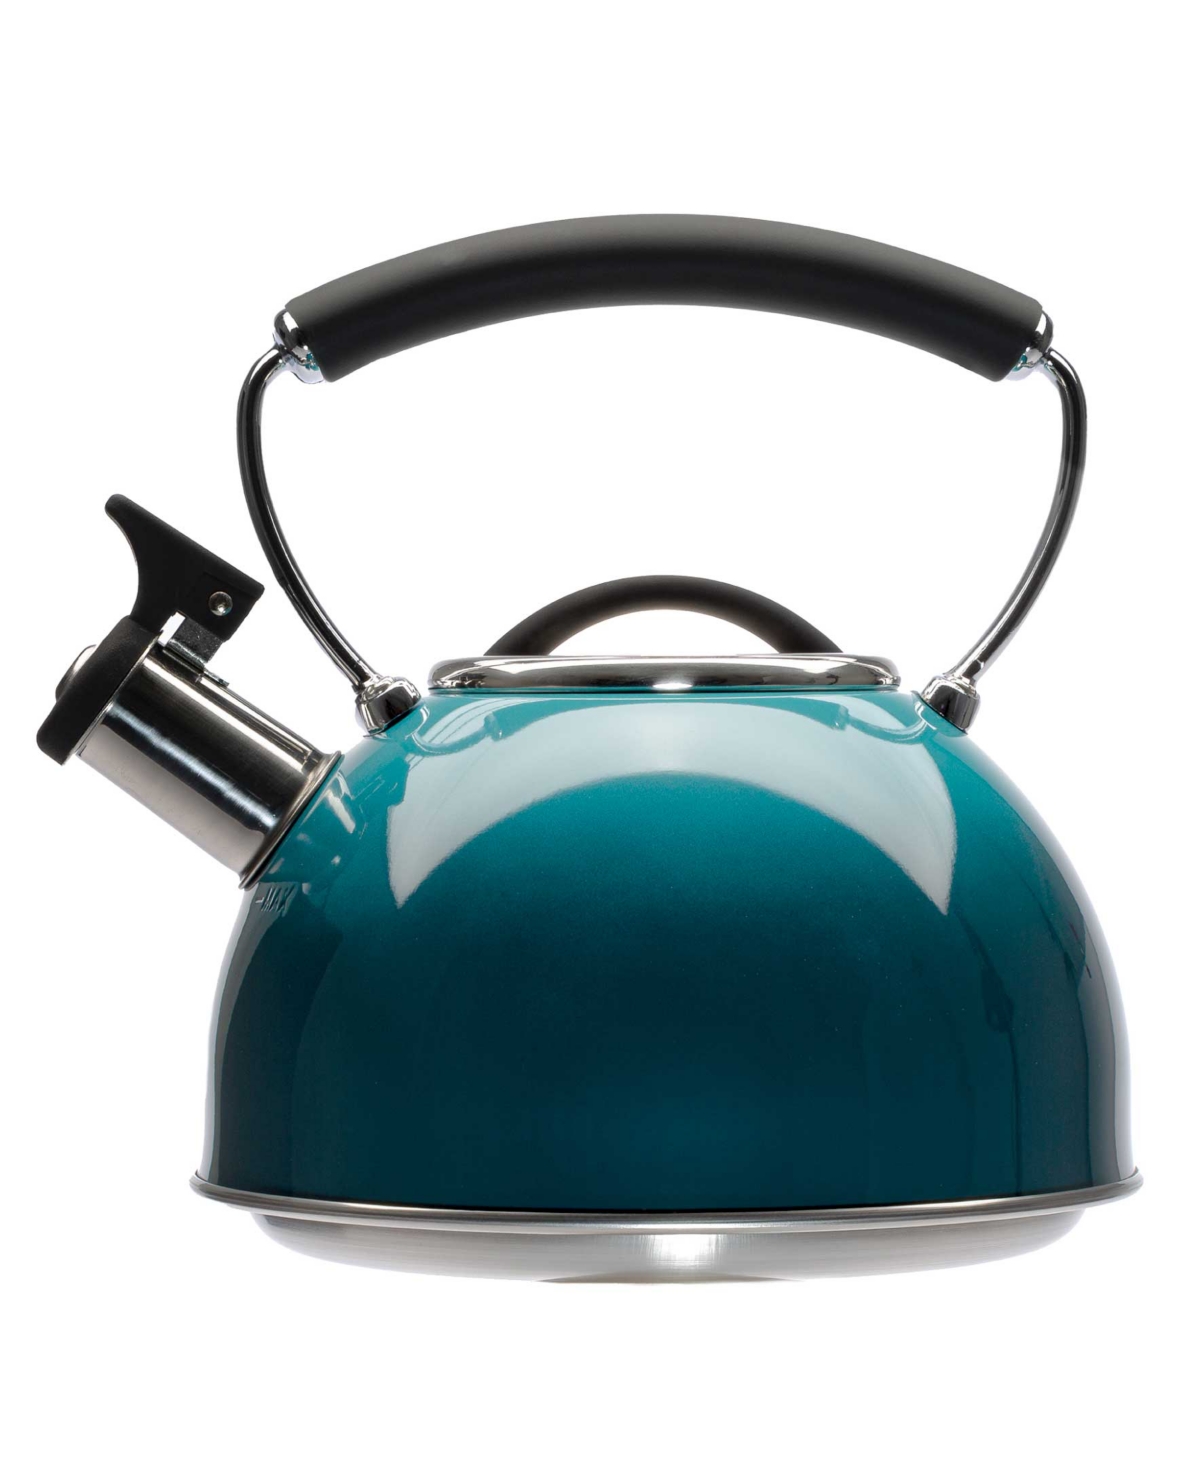 Primula Stainless Steel 2.3 Quart Chelsea Whistling Stovetop Tea Kettle In Teal